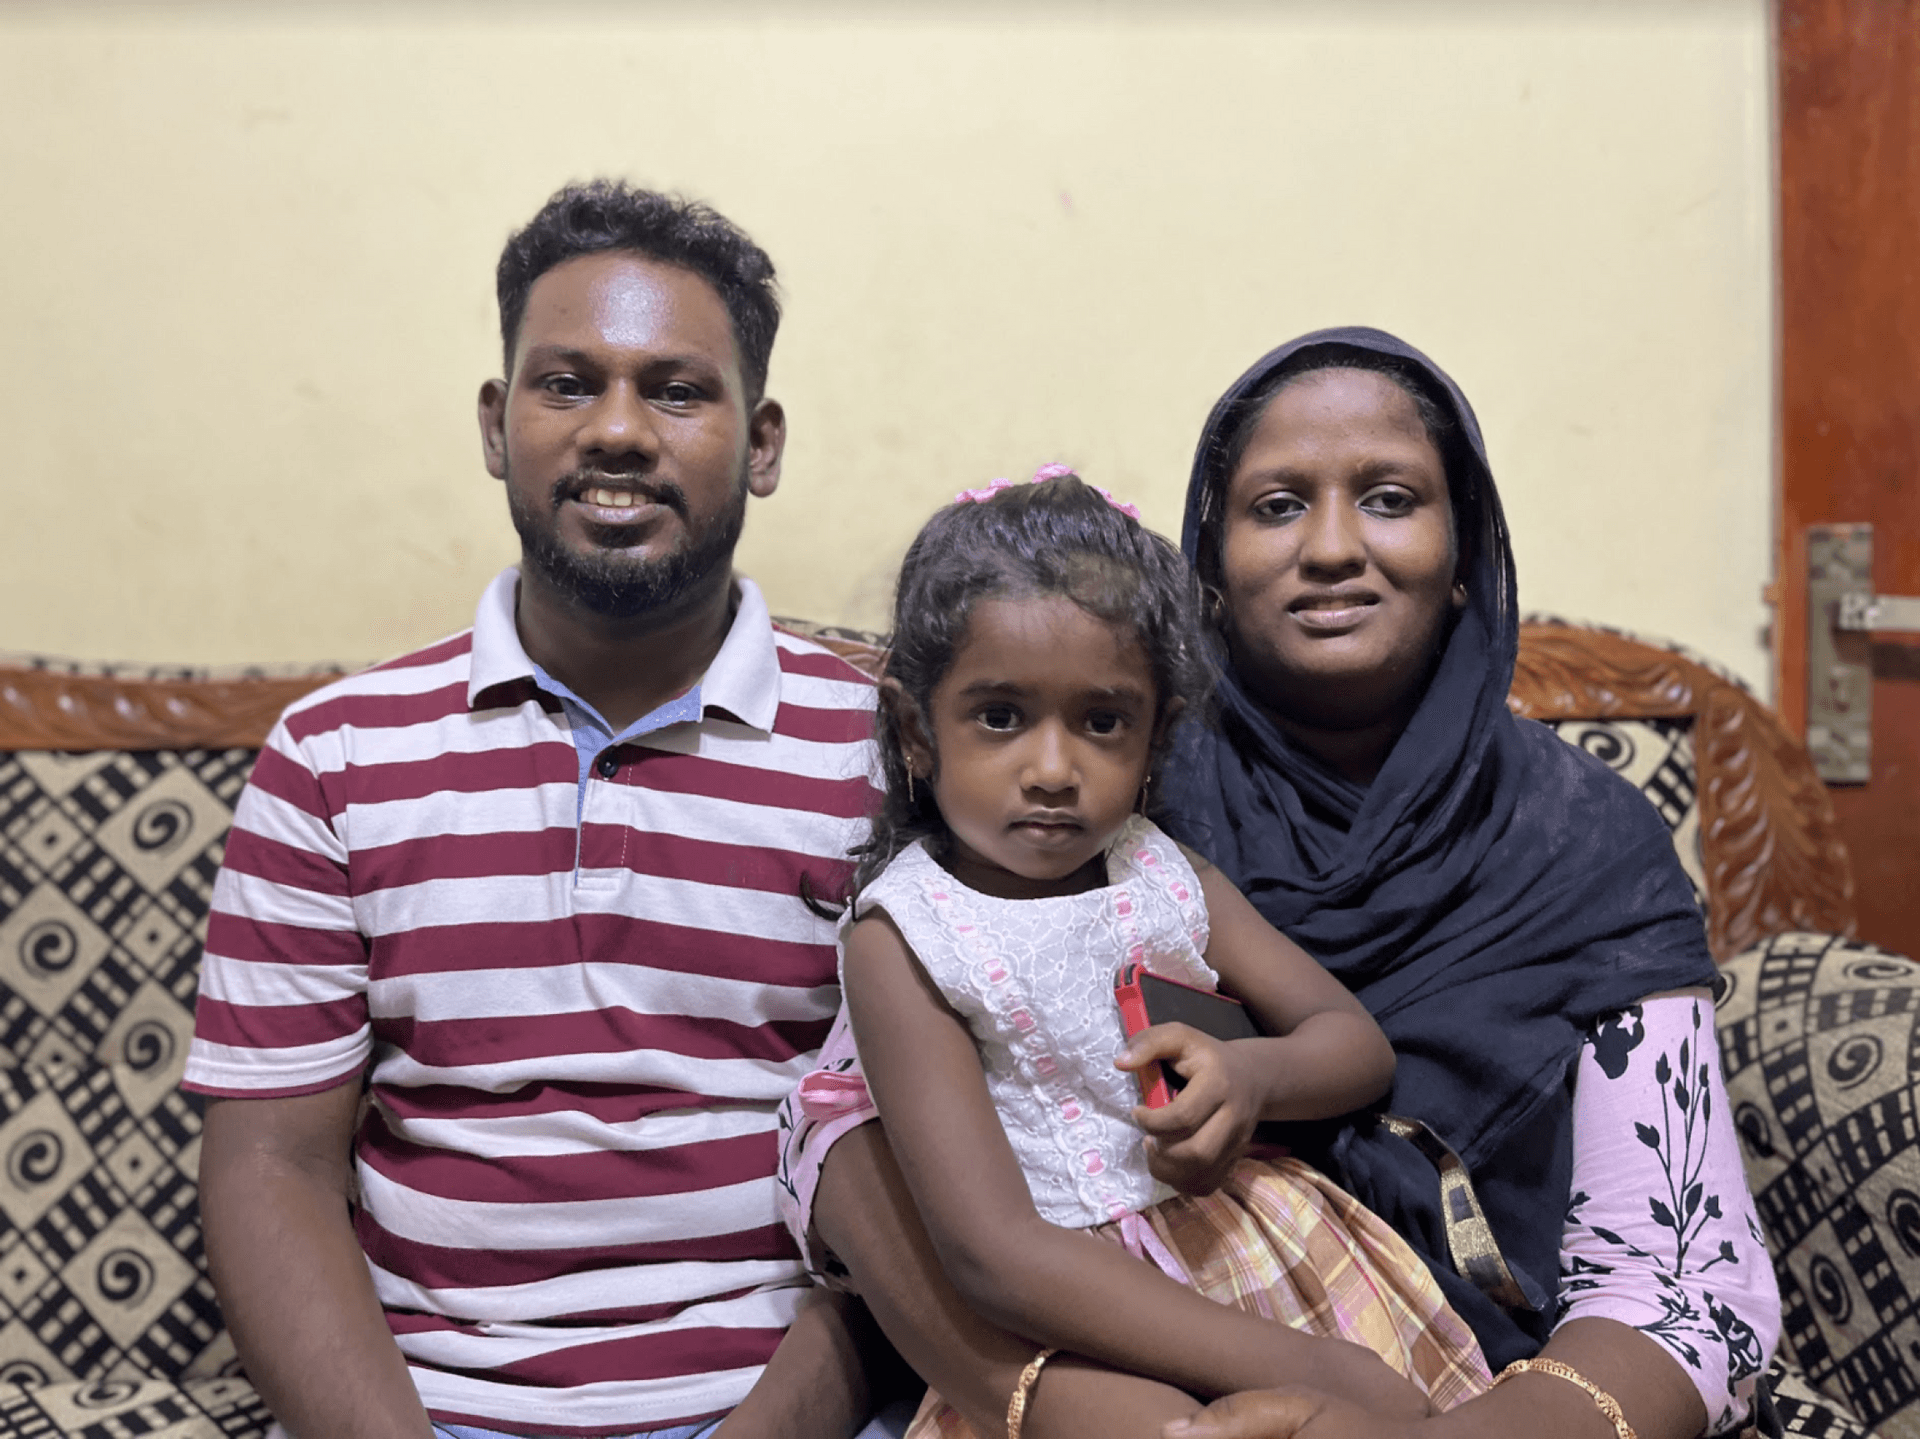 Mohammed Safry and Fathima Rukaiya, with their daughter Sara Safry, at their home in the suburbs of Colombo, Sri Lanka.